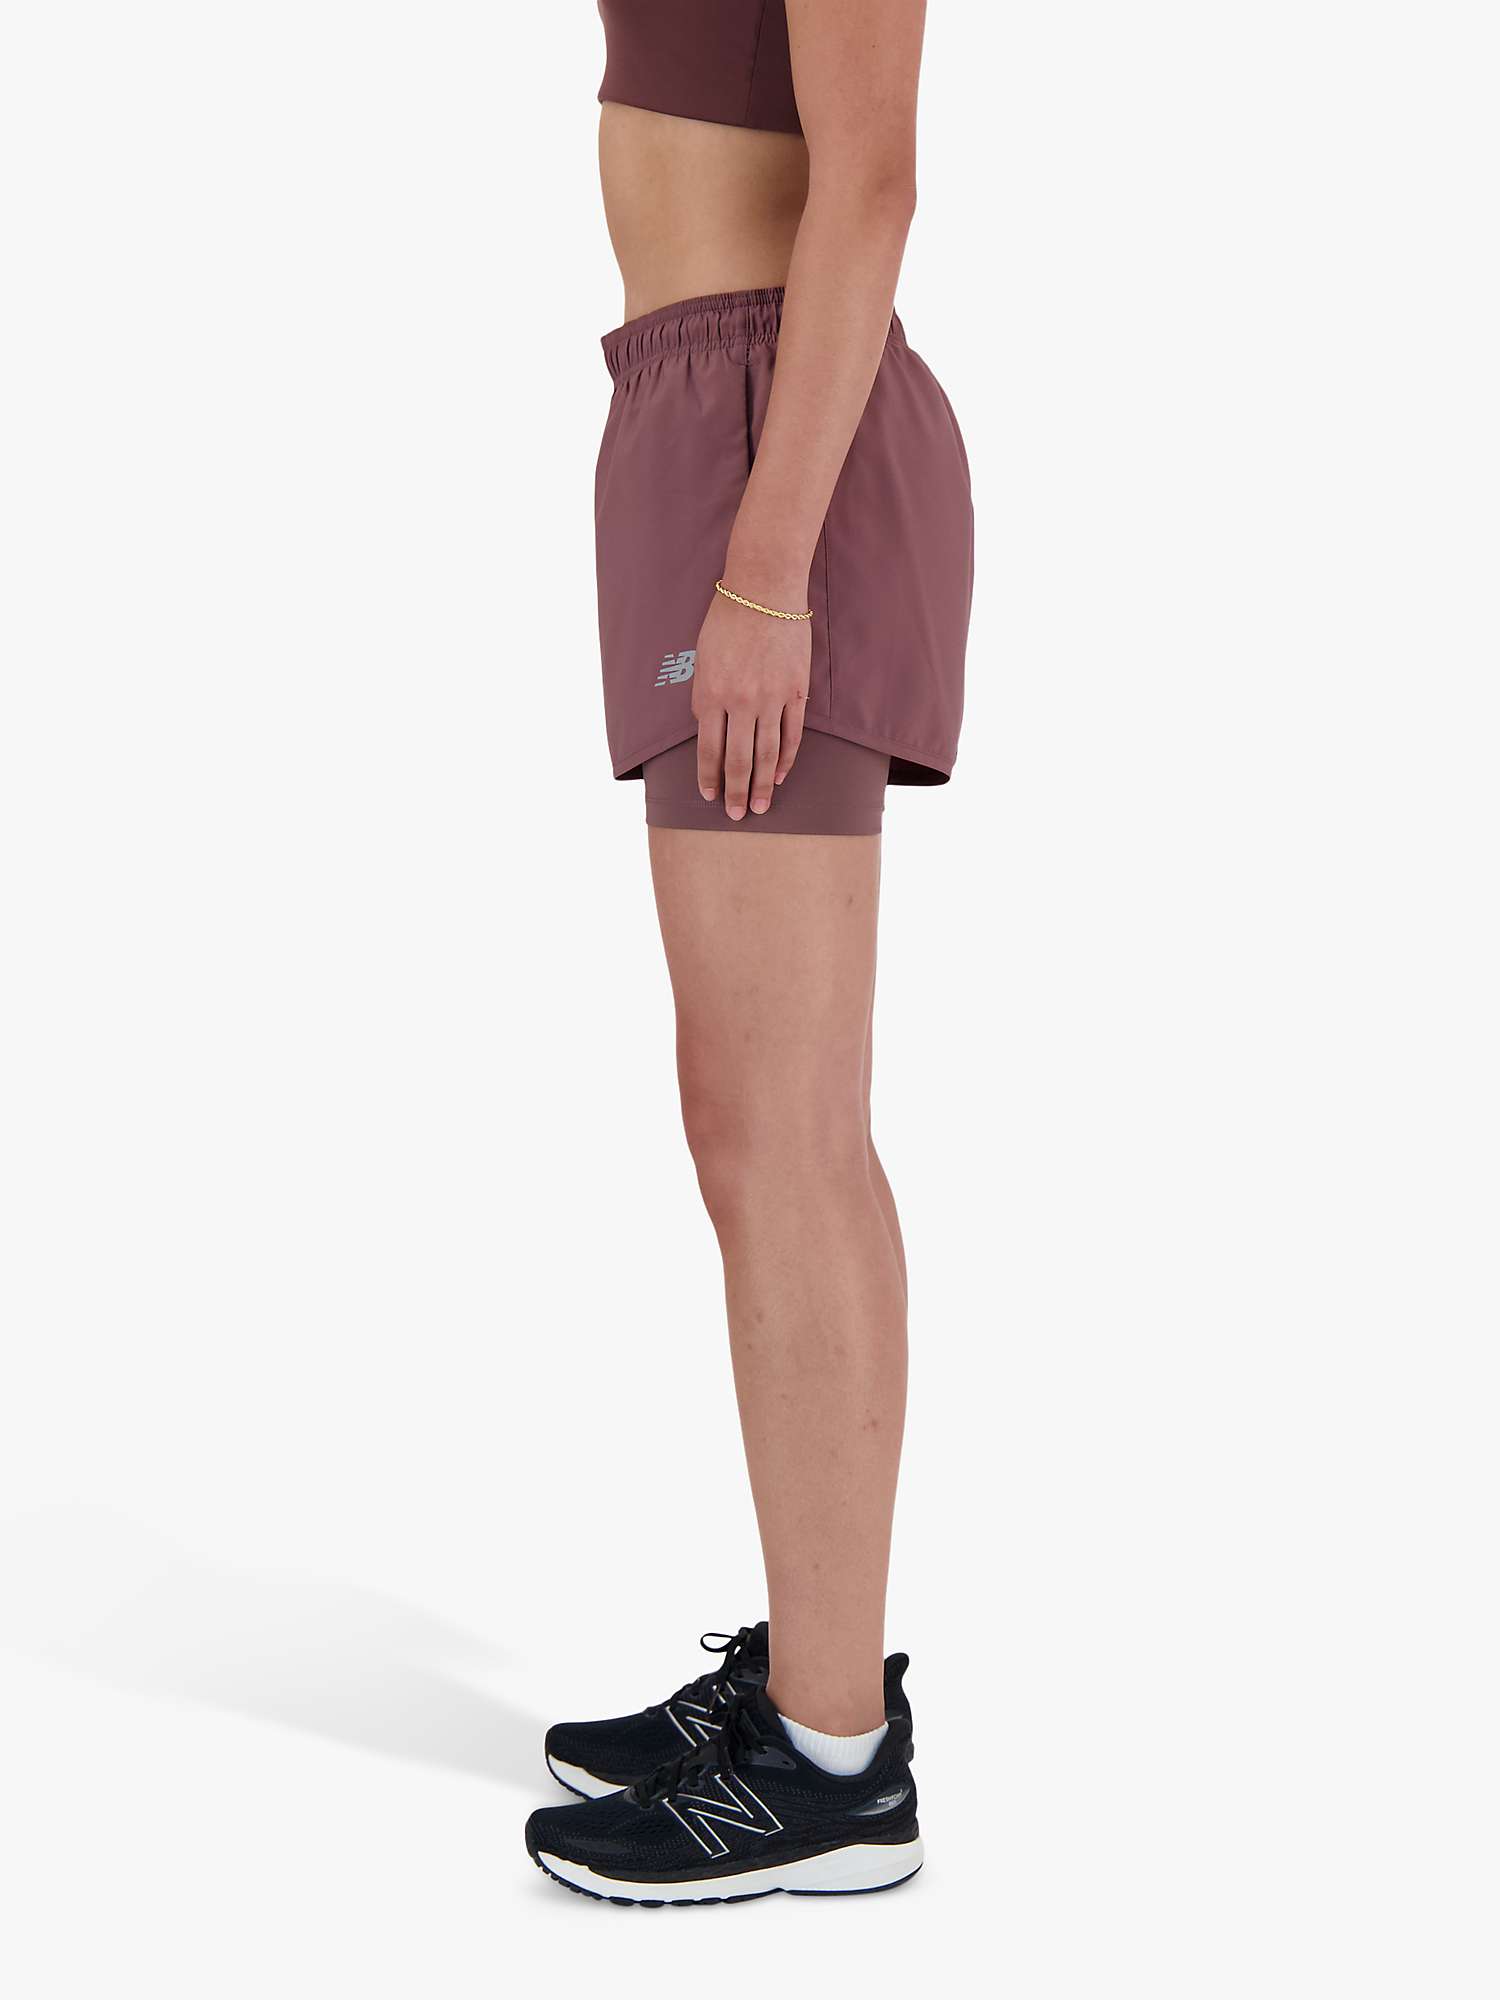 Buy New Balance Women's 2-in-1 Shorts, Licorice Online at johnlewis.com